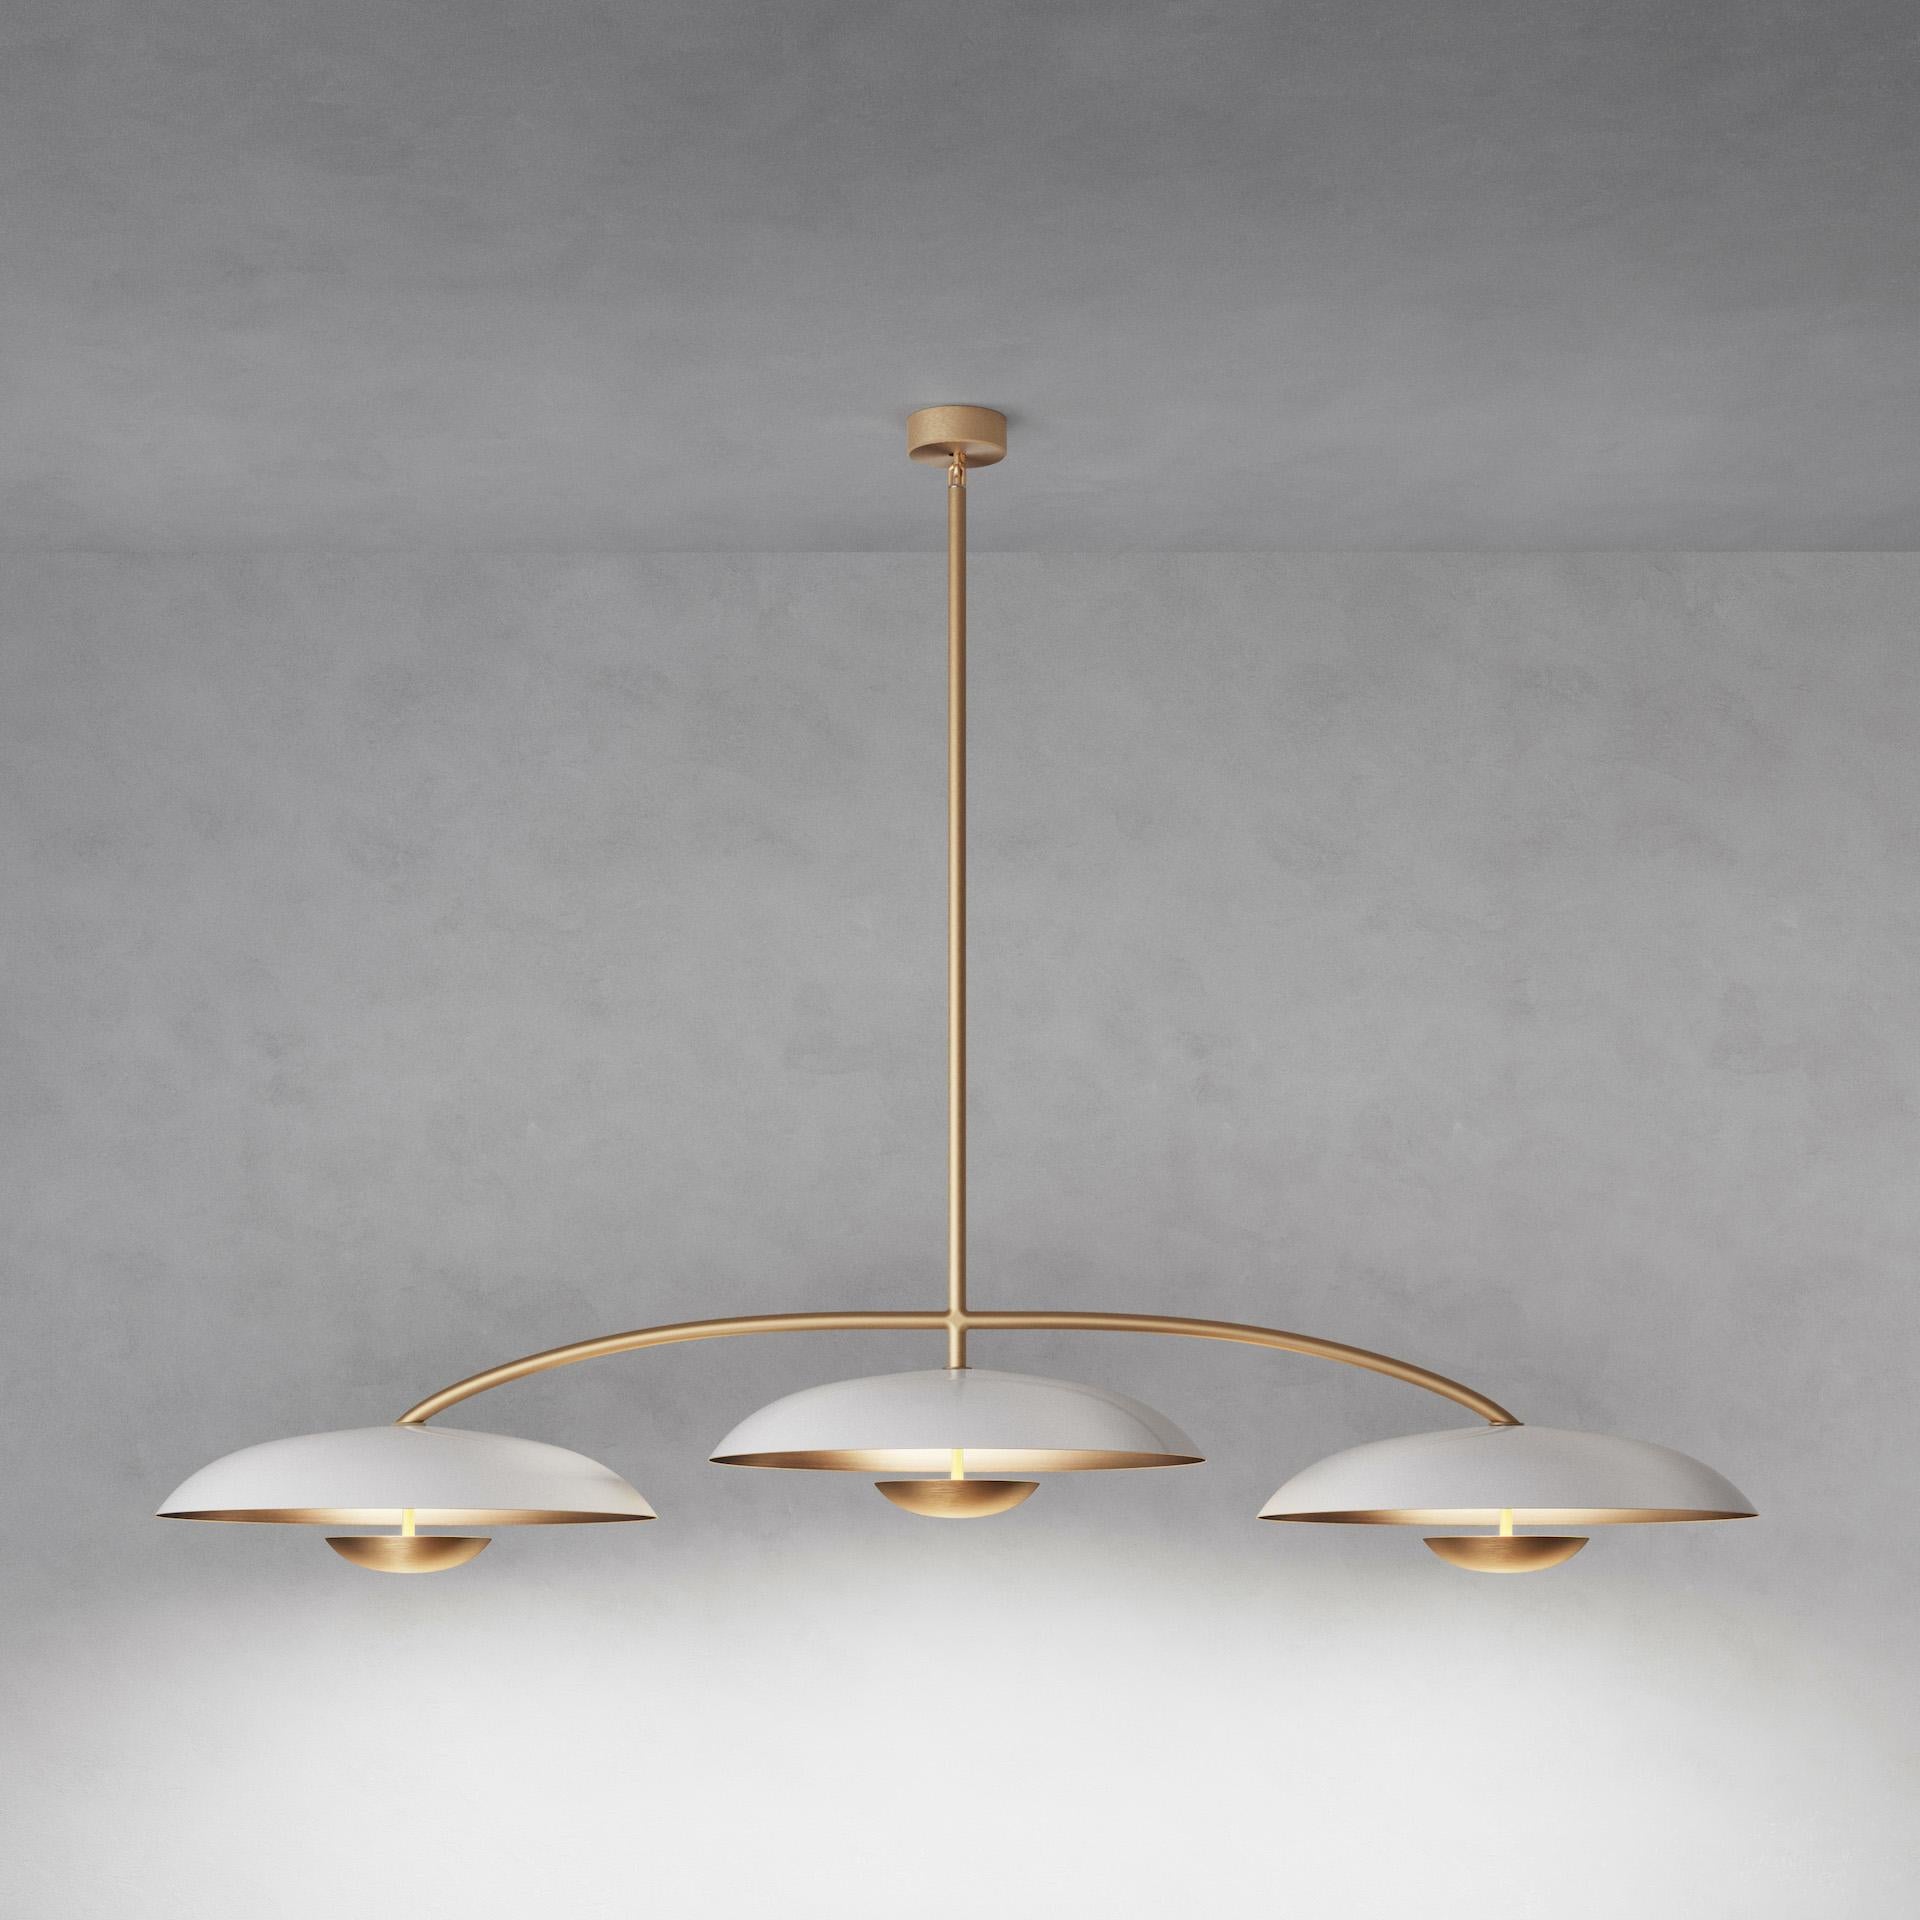 Orbit Trio Purion XL Ceiling Light by Atelier001
Dimensions: D60 x W160 x H115 cm
Materials: Shade Gloss or matt white lacquered brass
Framework Satin brass
Also Available: In different finishes.

All our lamps can be wired according to each